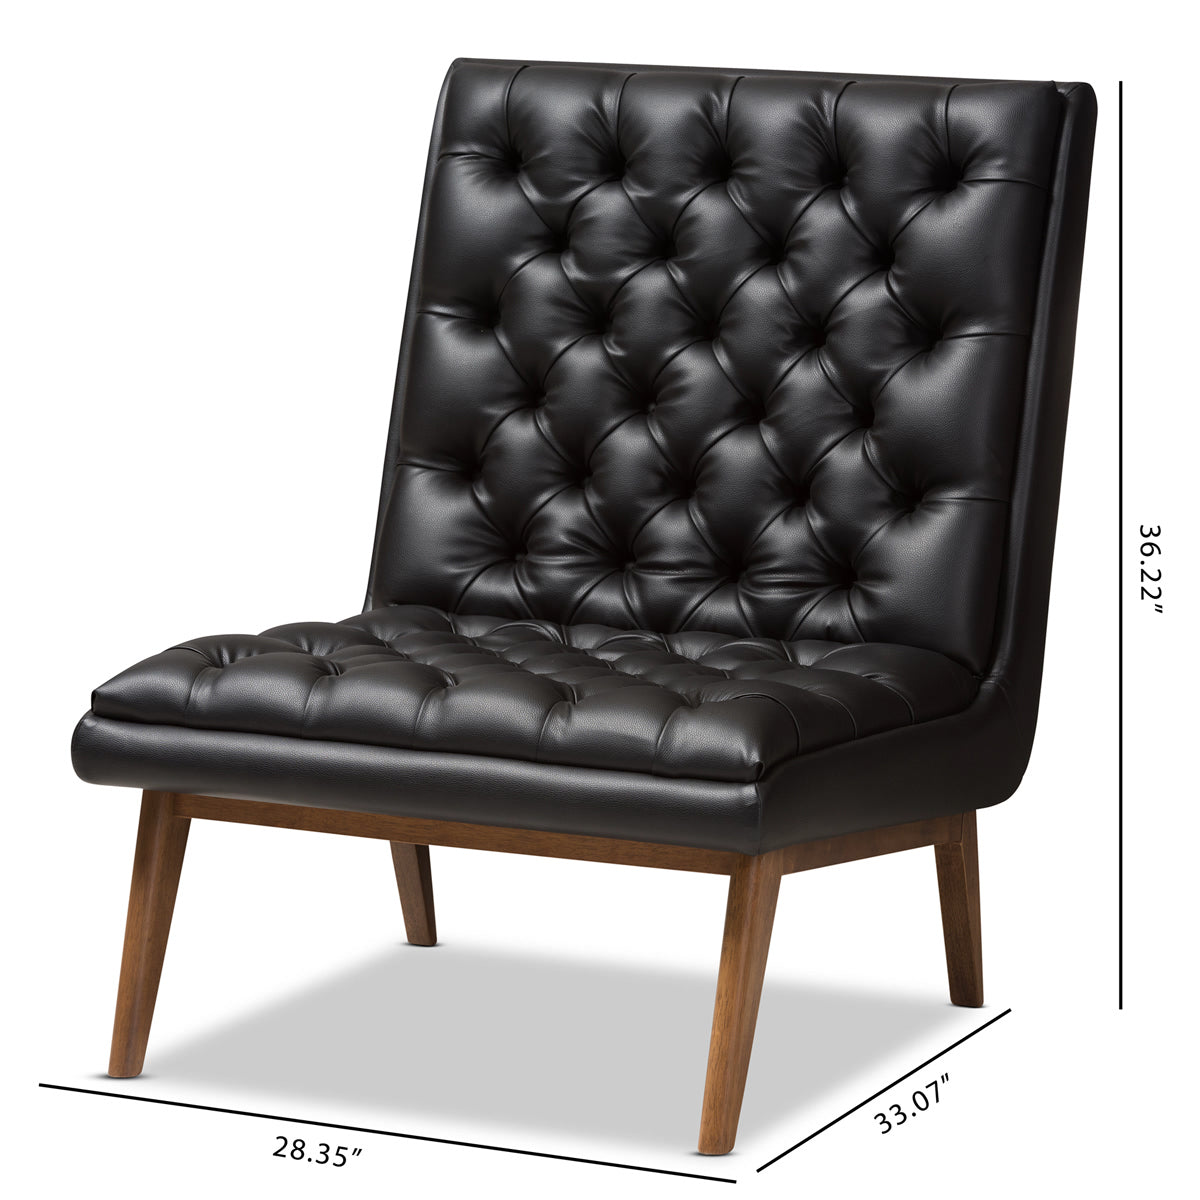 Baxton Studio Annetha Mid-Century Modern Black Faux Leather Upholstered Walnut Finished Wood Lounge Chair Baxton Studio-chairs-Minimal And Modern - 9